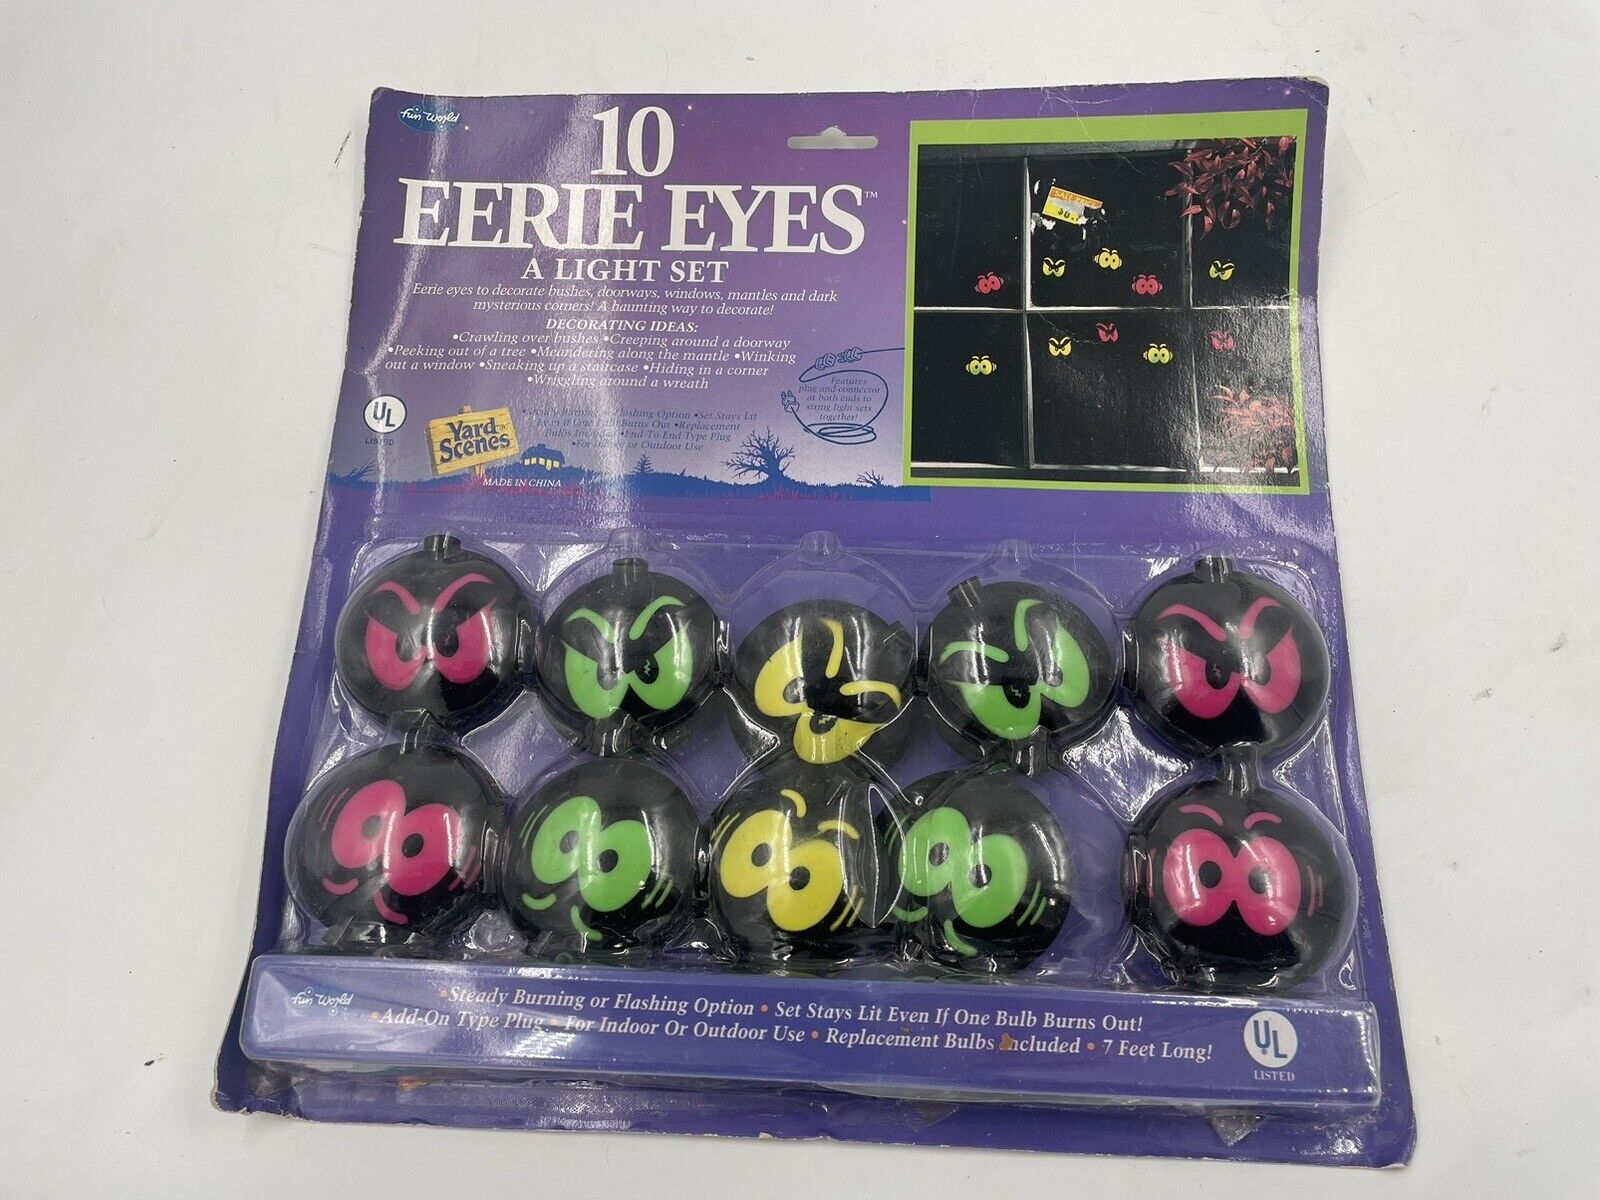 New Eerie Eyes Halloween String 10 Light Set by Fun World - Spooky Creepy Faces